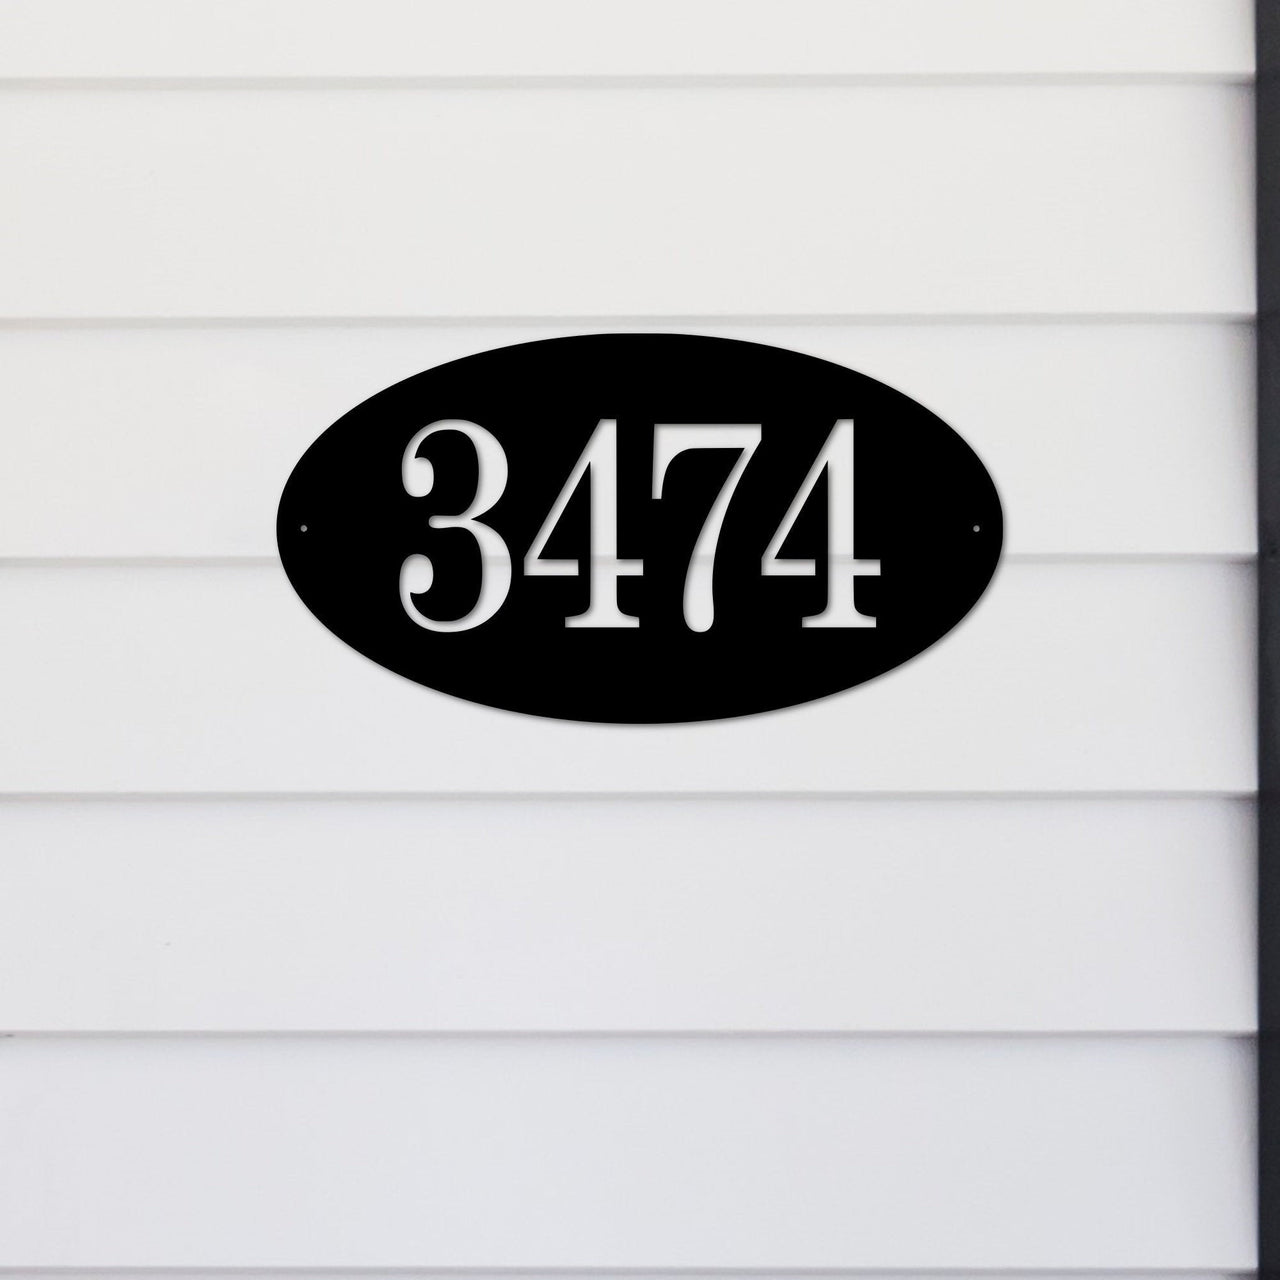 Custom Oval Address Plaque | Metal Address Sign for House | Home Address Numbers | Metal Address Plate | Housewarming Gift for Couple